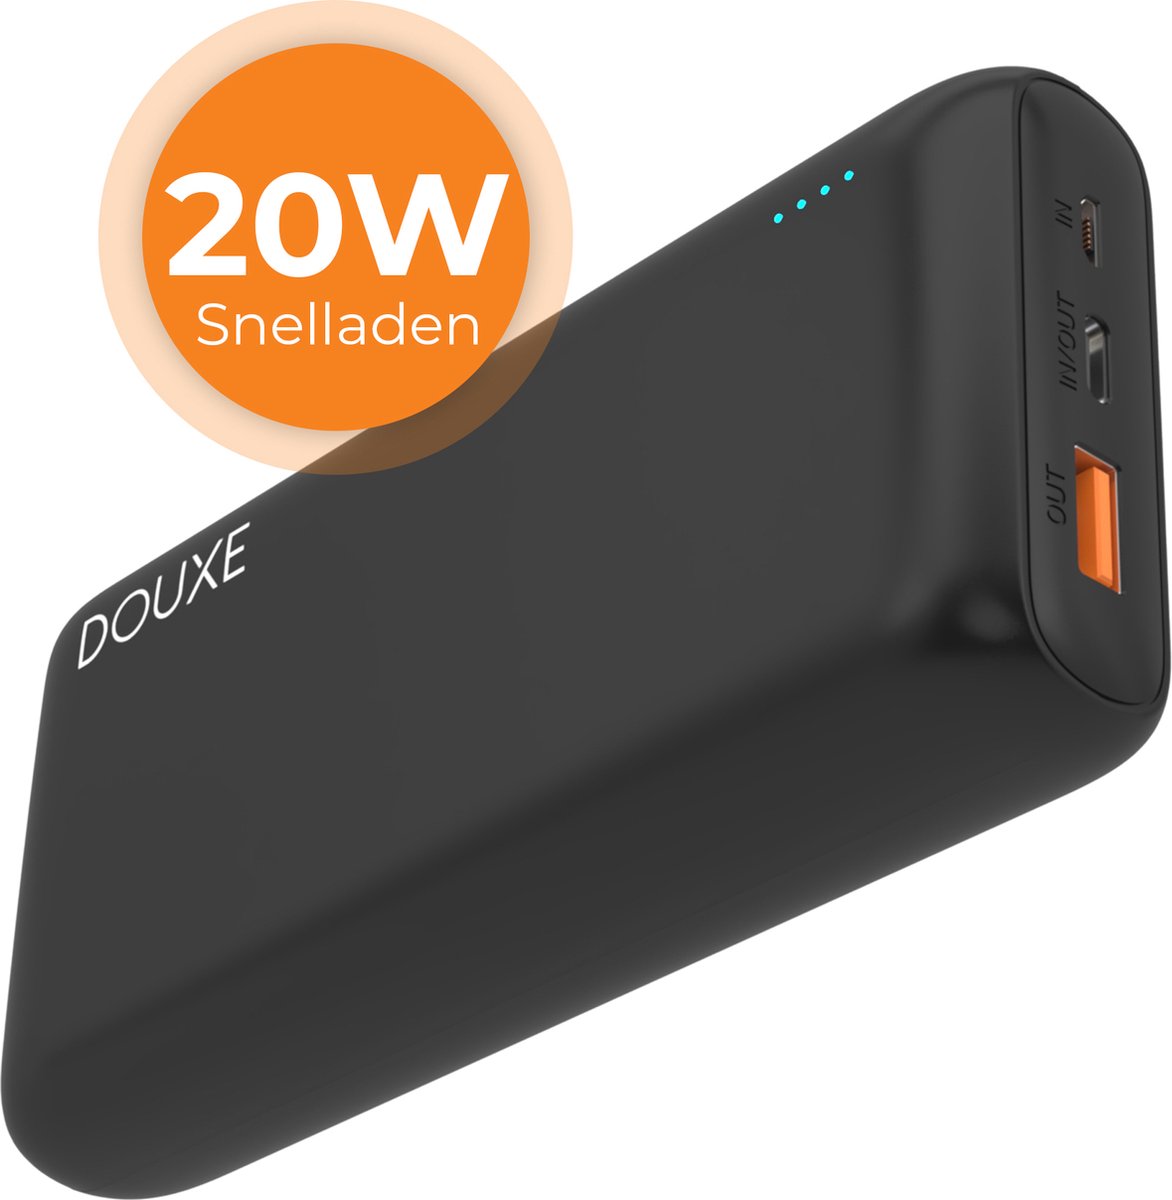 Douxe Fast Charge Powerbank 20.000 m.A.h. - Powerbank 20W Dual 3.0A - Snellaad Power bank - USB-C en USB-A - Met kabel